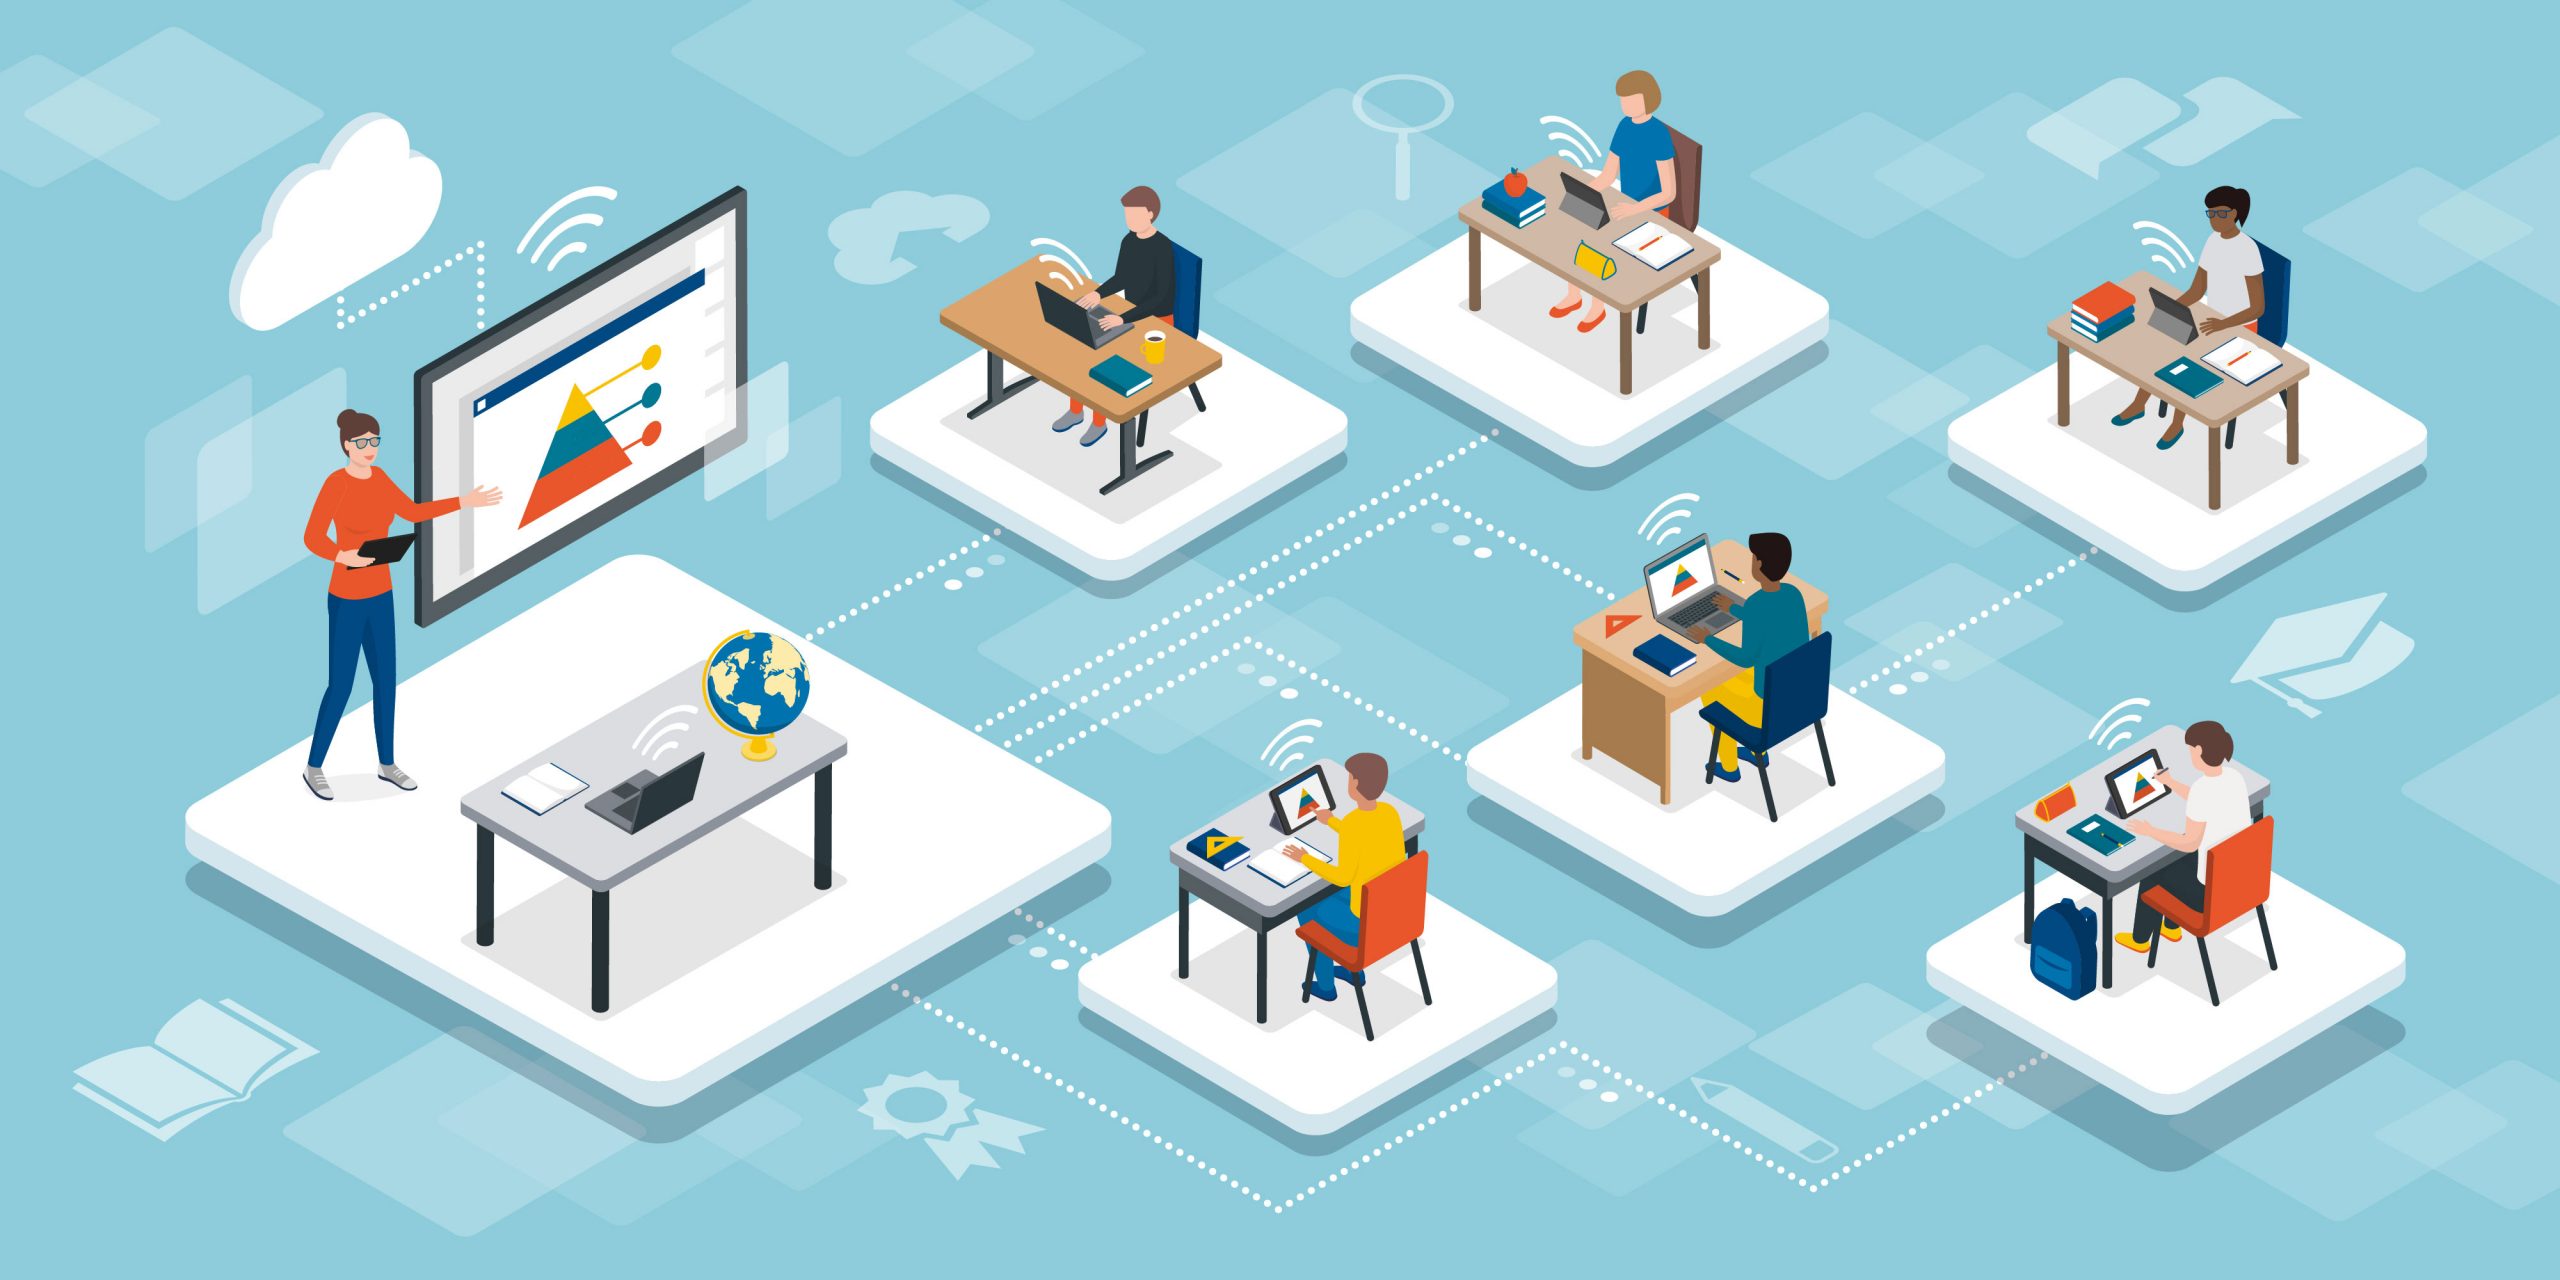 Isometric illustration showing a teacher instructing on one square platform while six seperate people on square platforms work on laptops or tablets. Students platforms are connected to the teachers platforms by dotted lines.